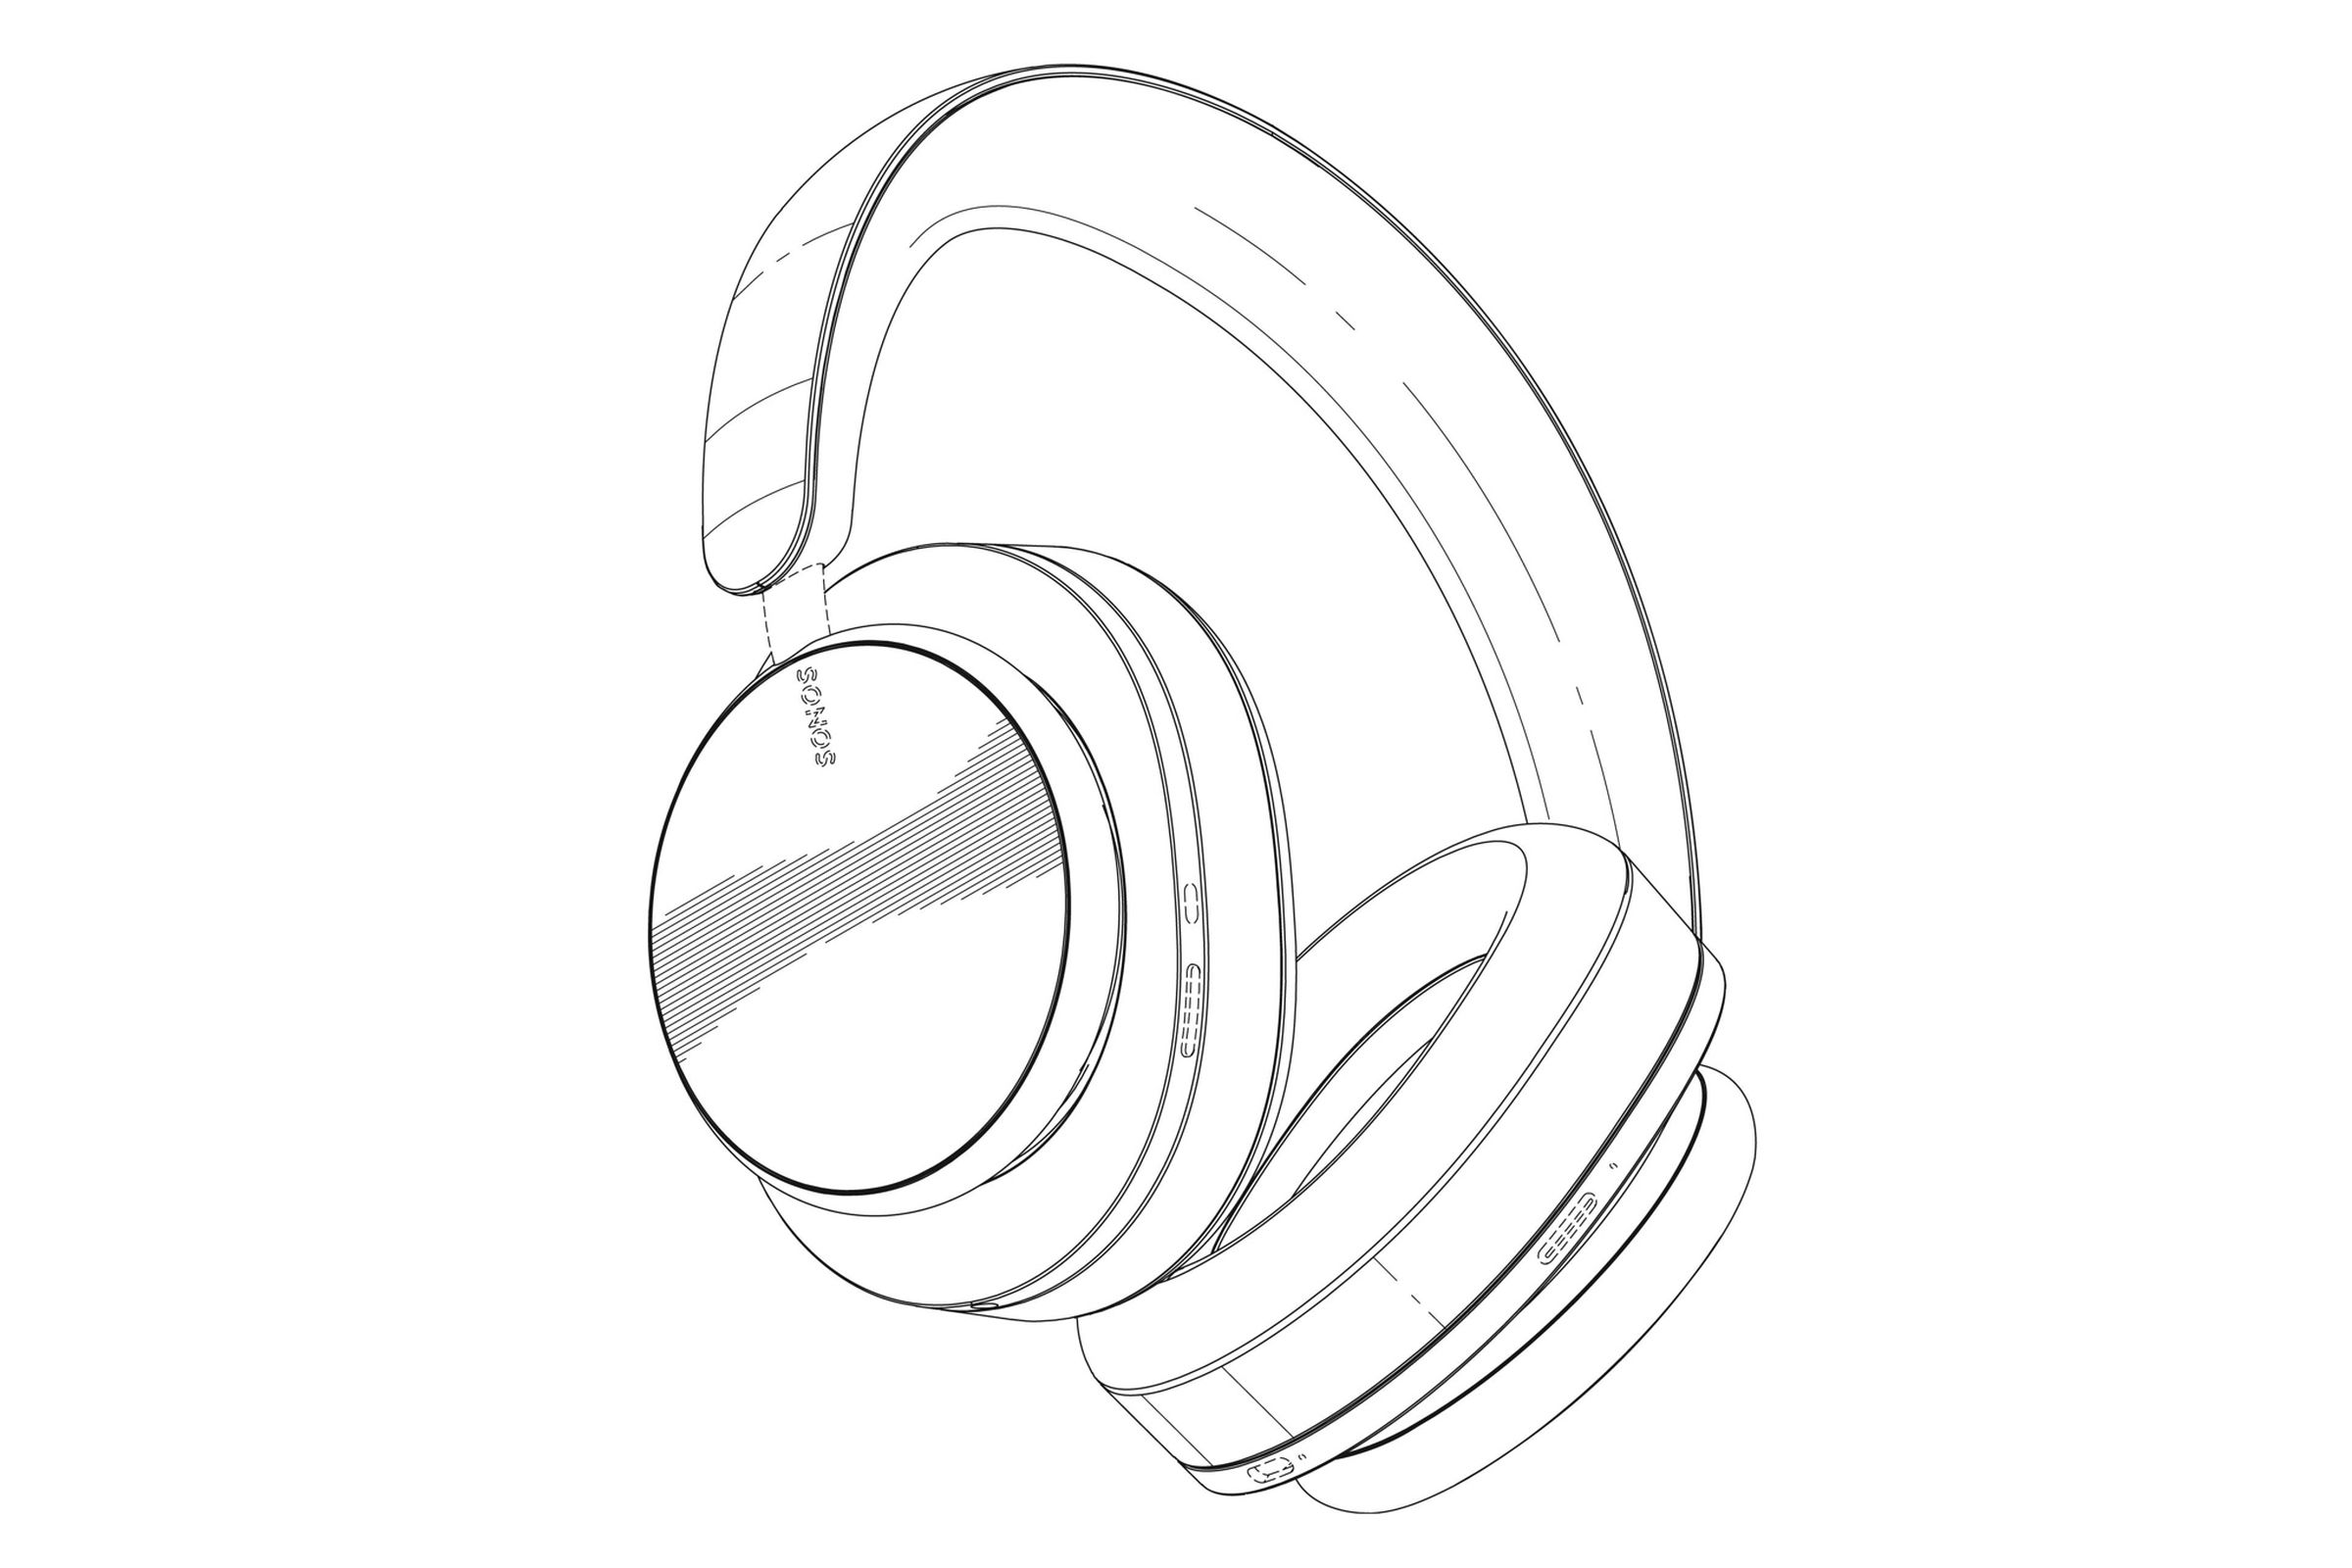 Images of Sonos’ rumored headphones from a patent application.